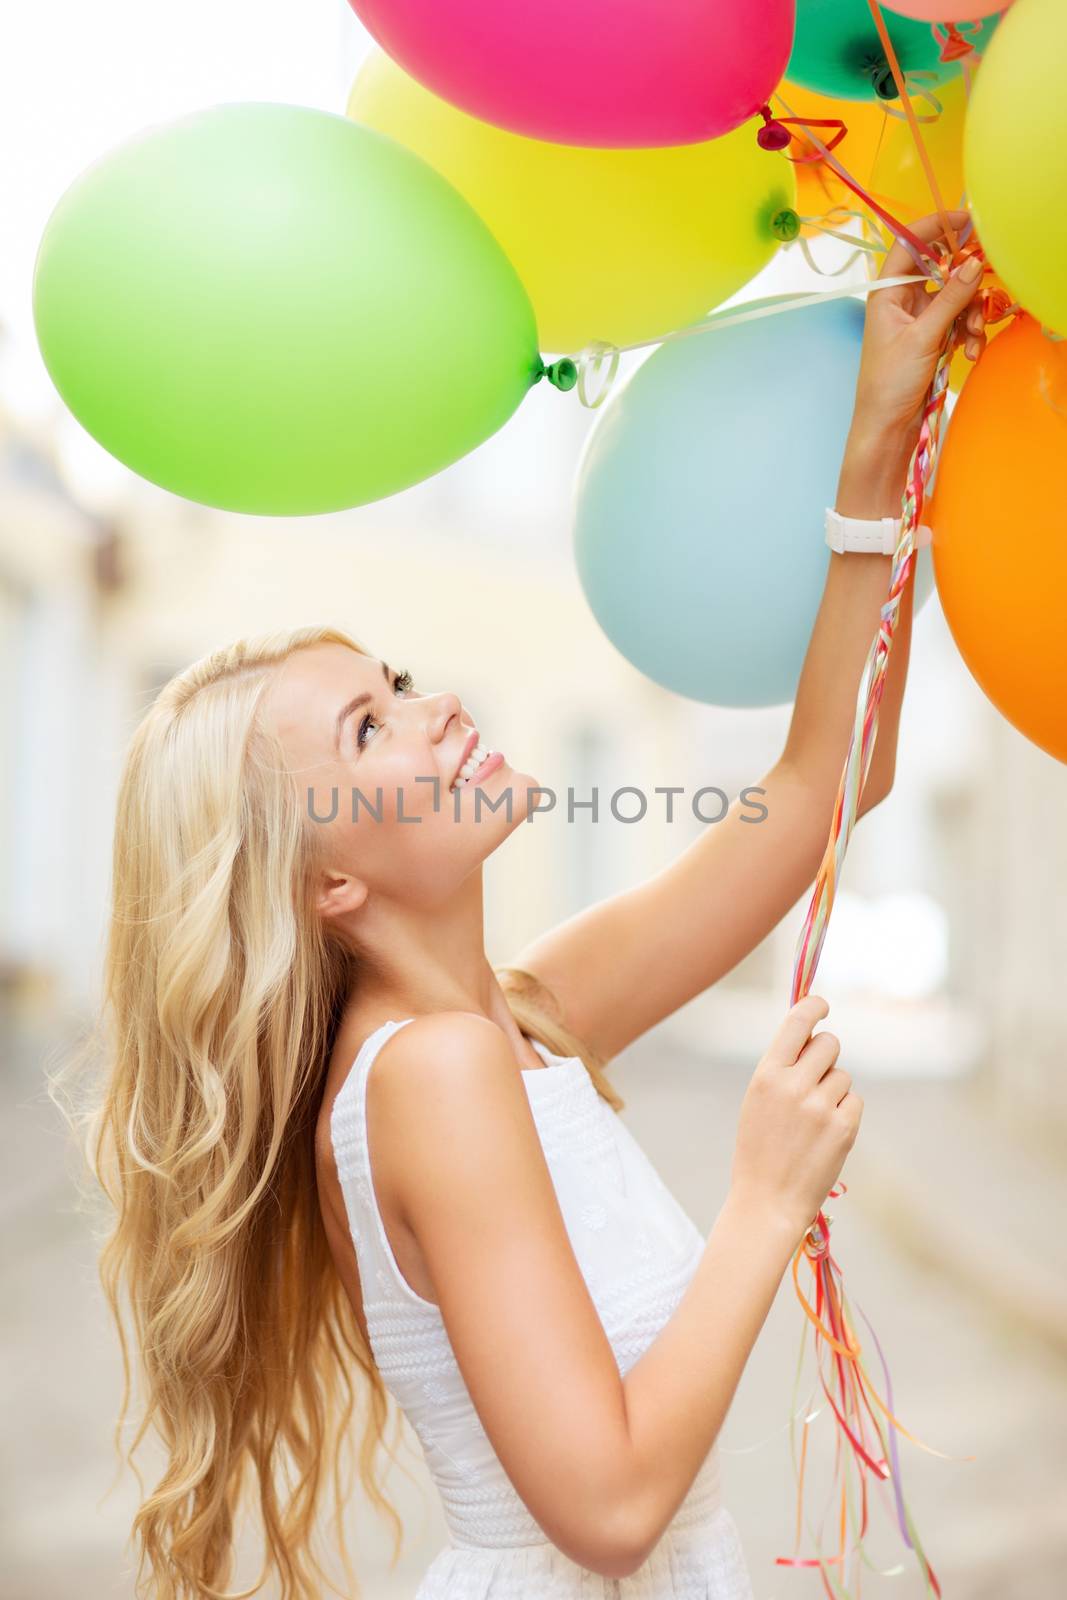 woman with colorful balloons by dolgachov